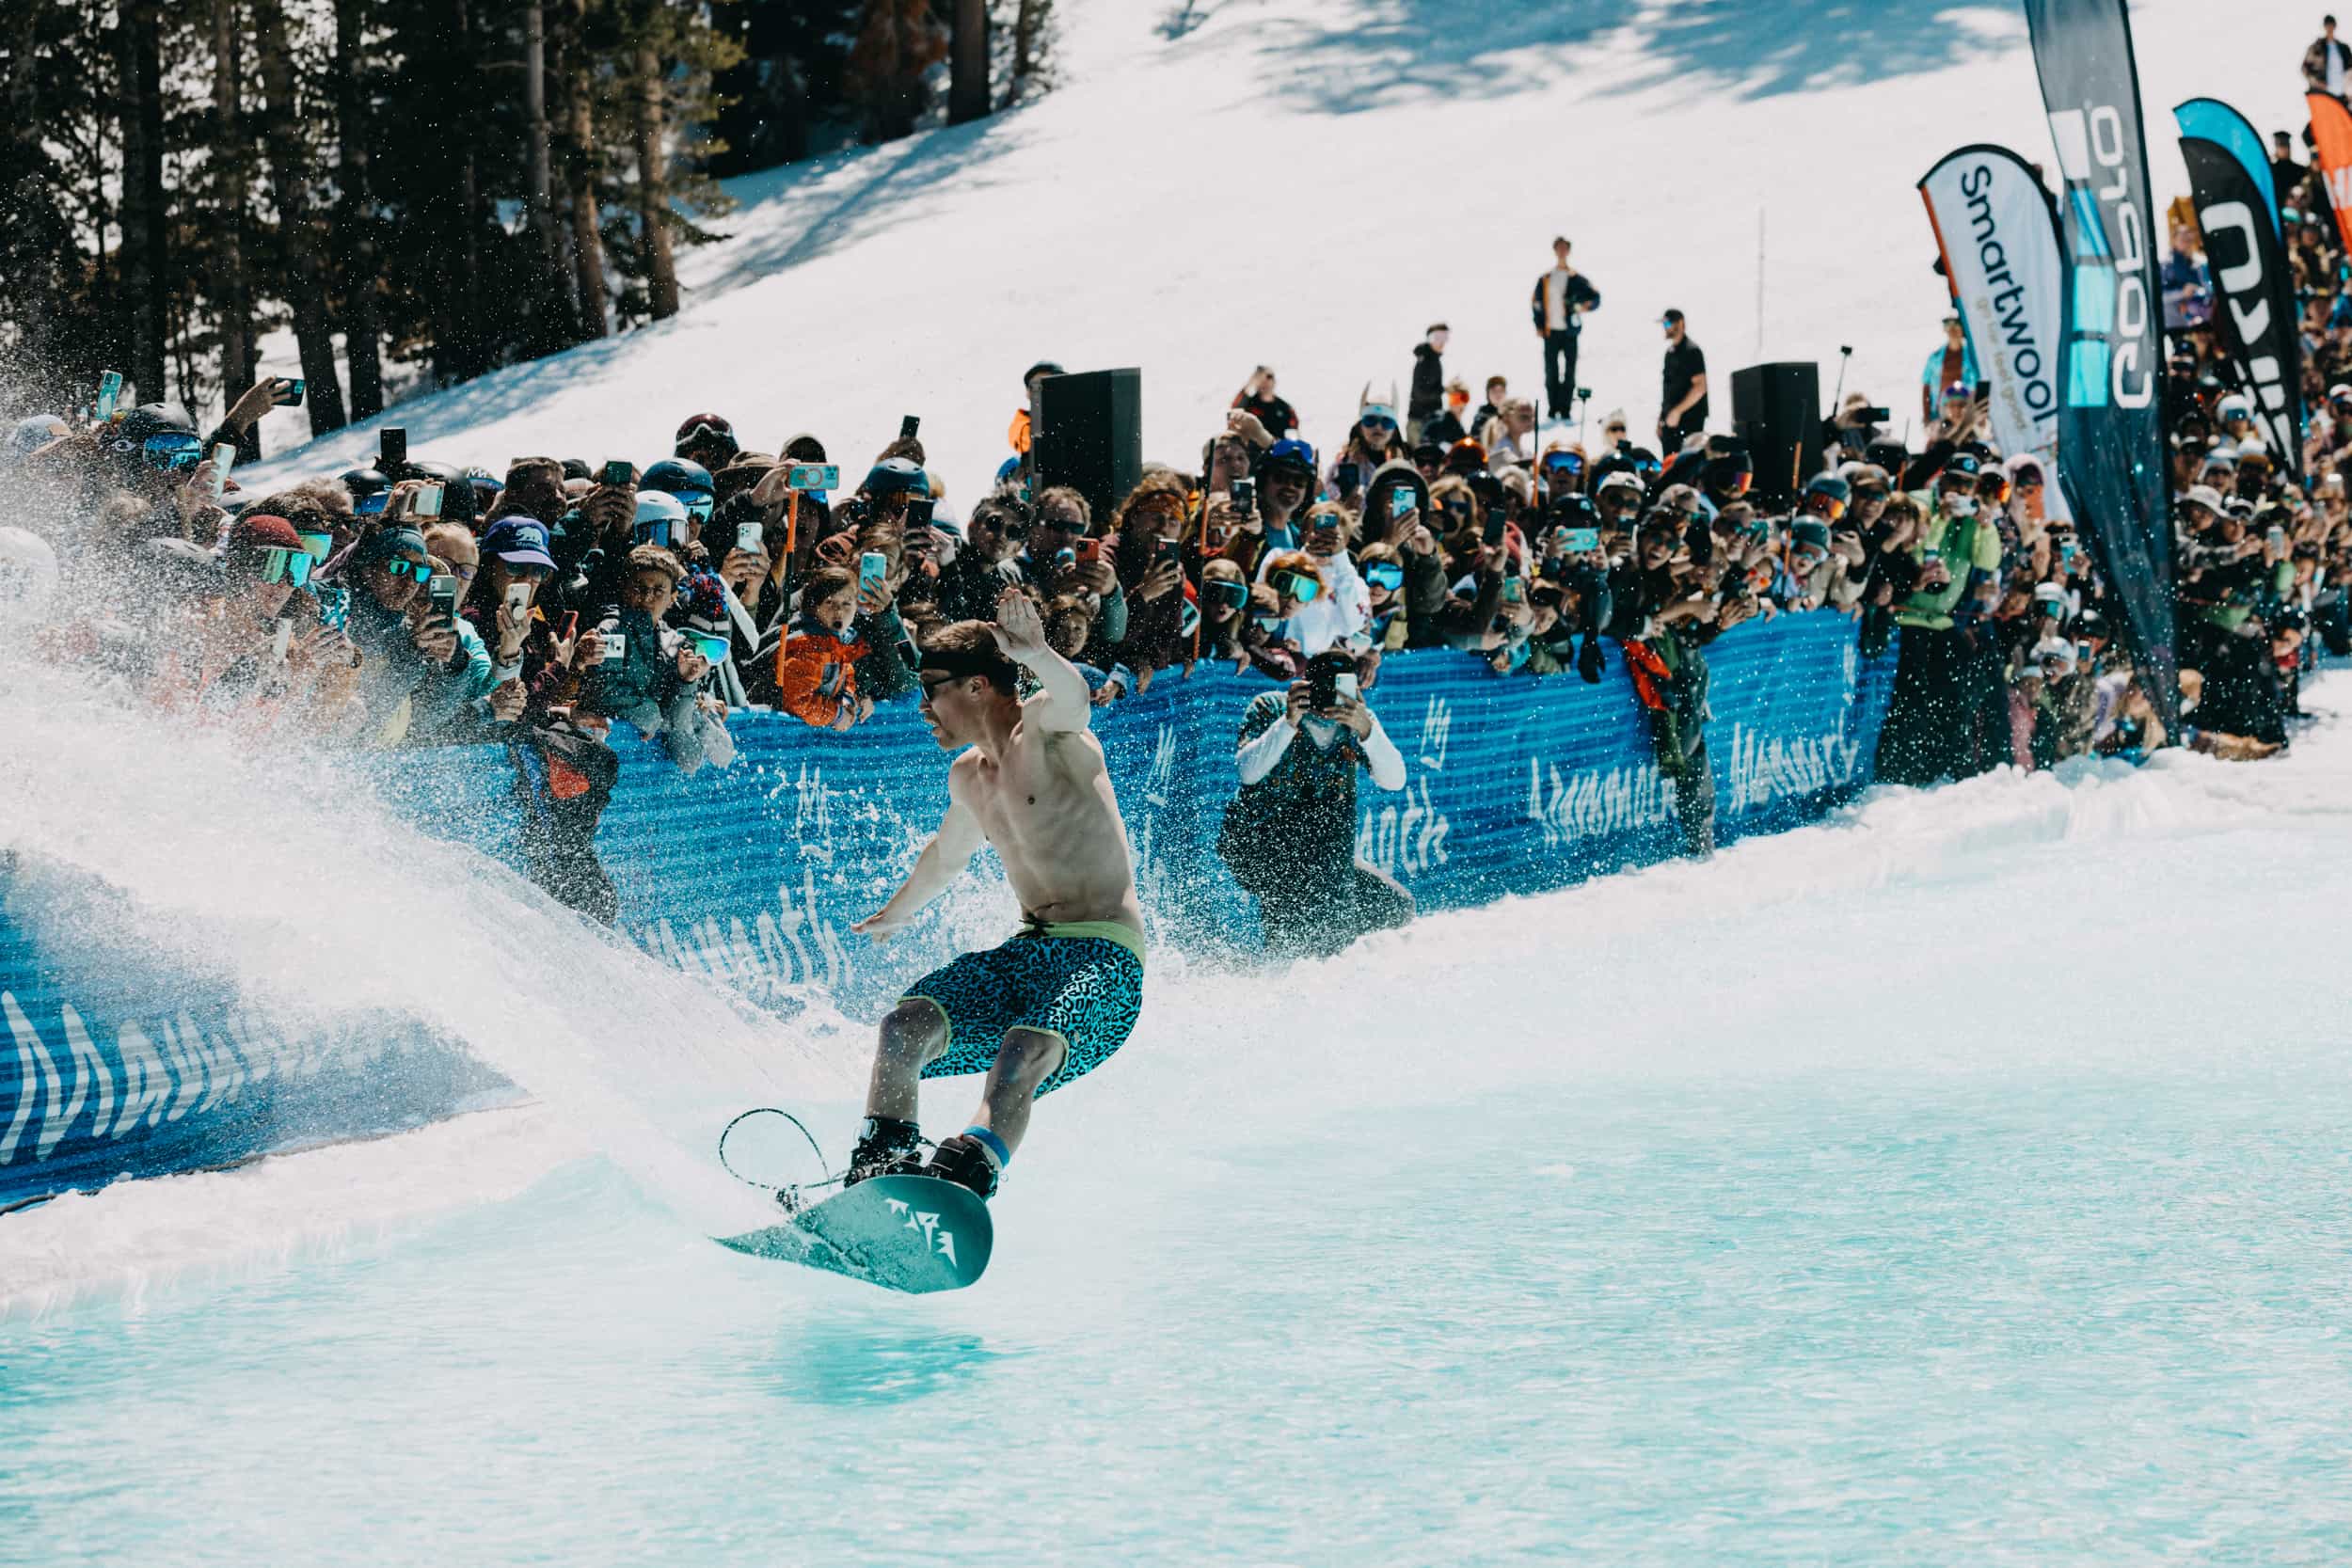 Half naked snowboarder at Mammoth Mountain pond skim in spring